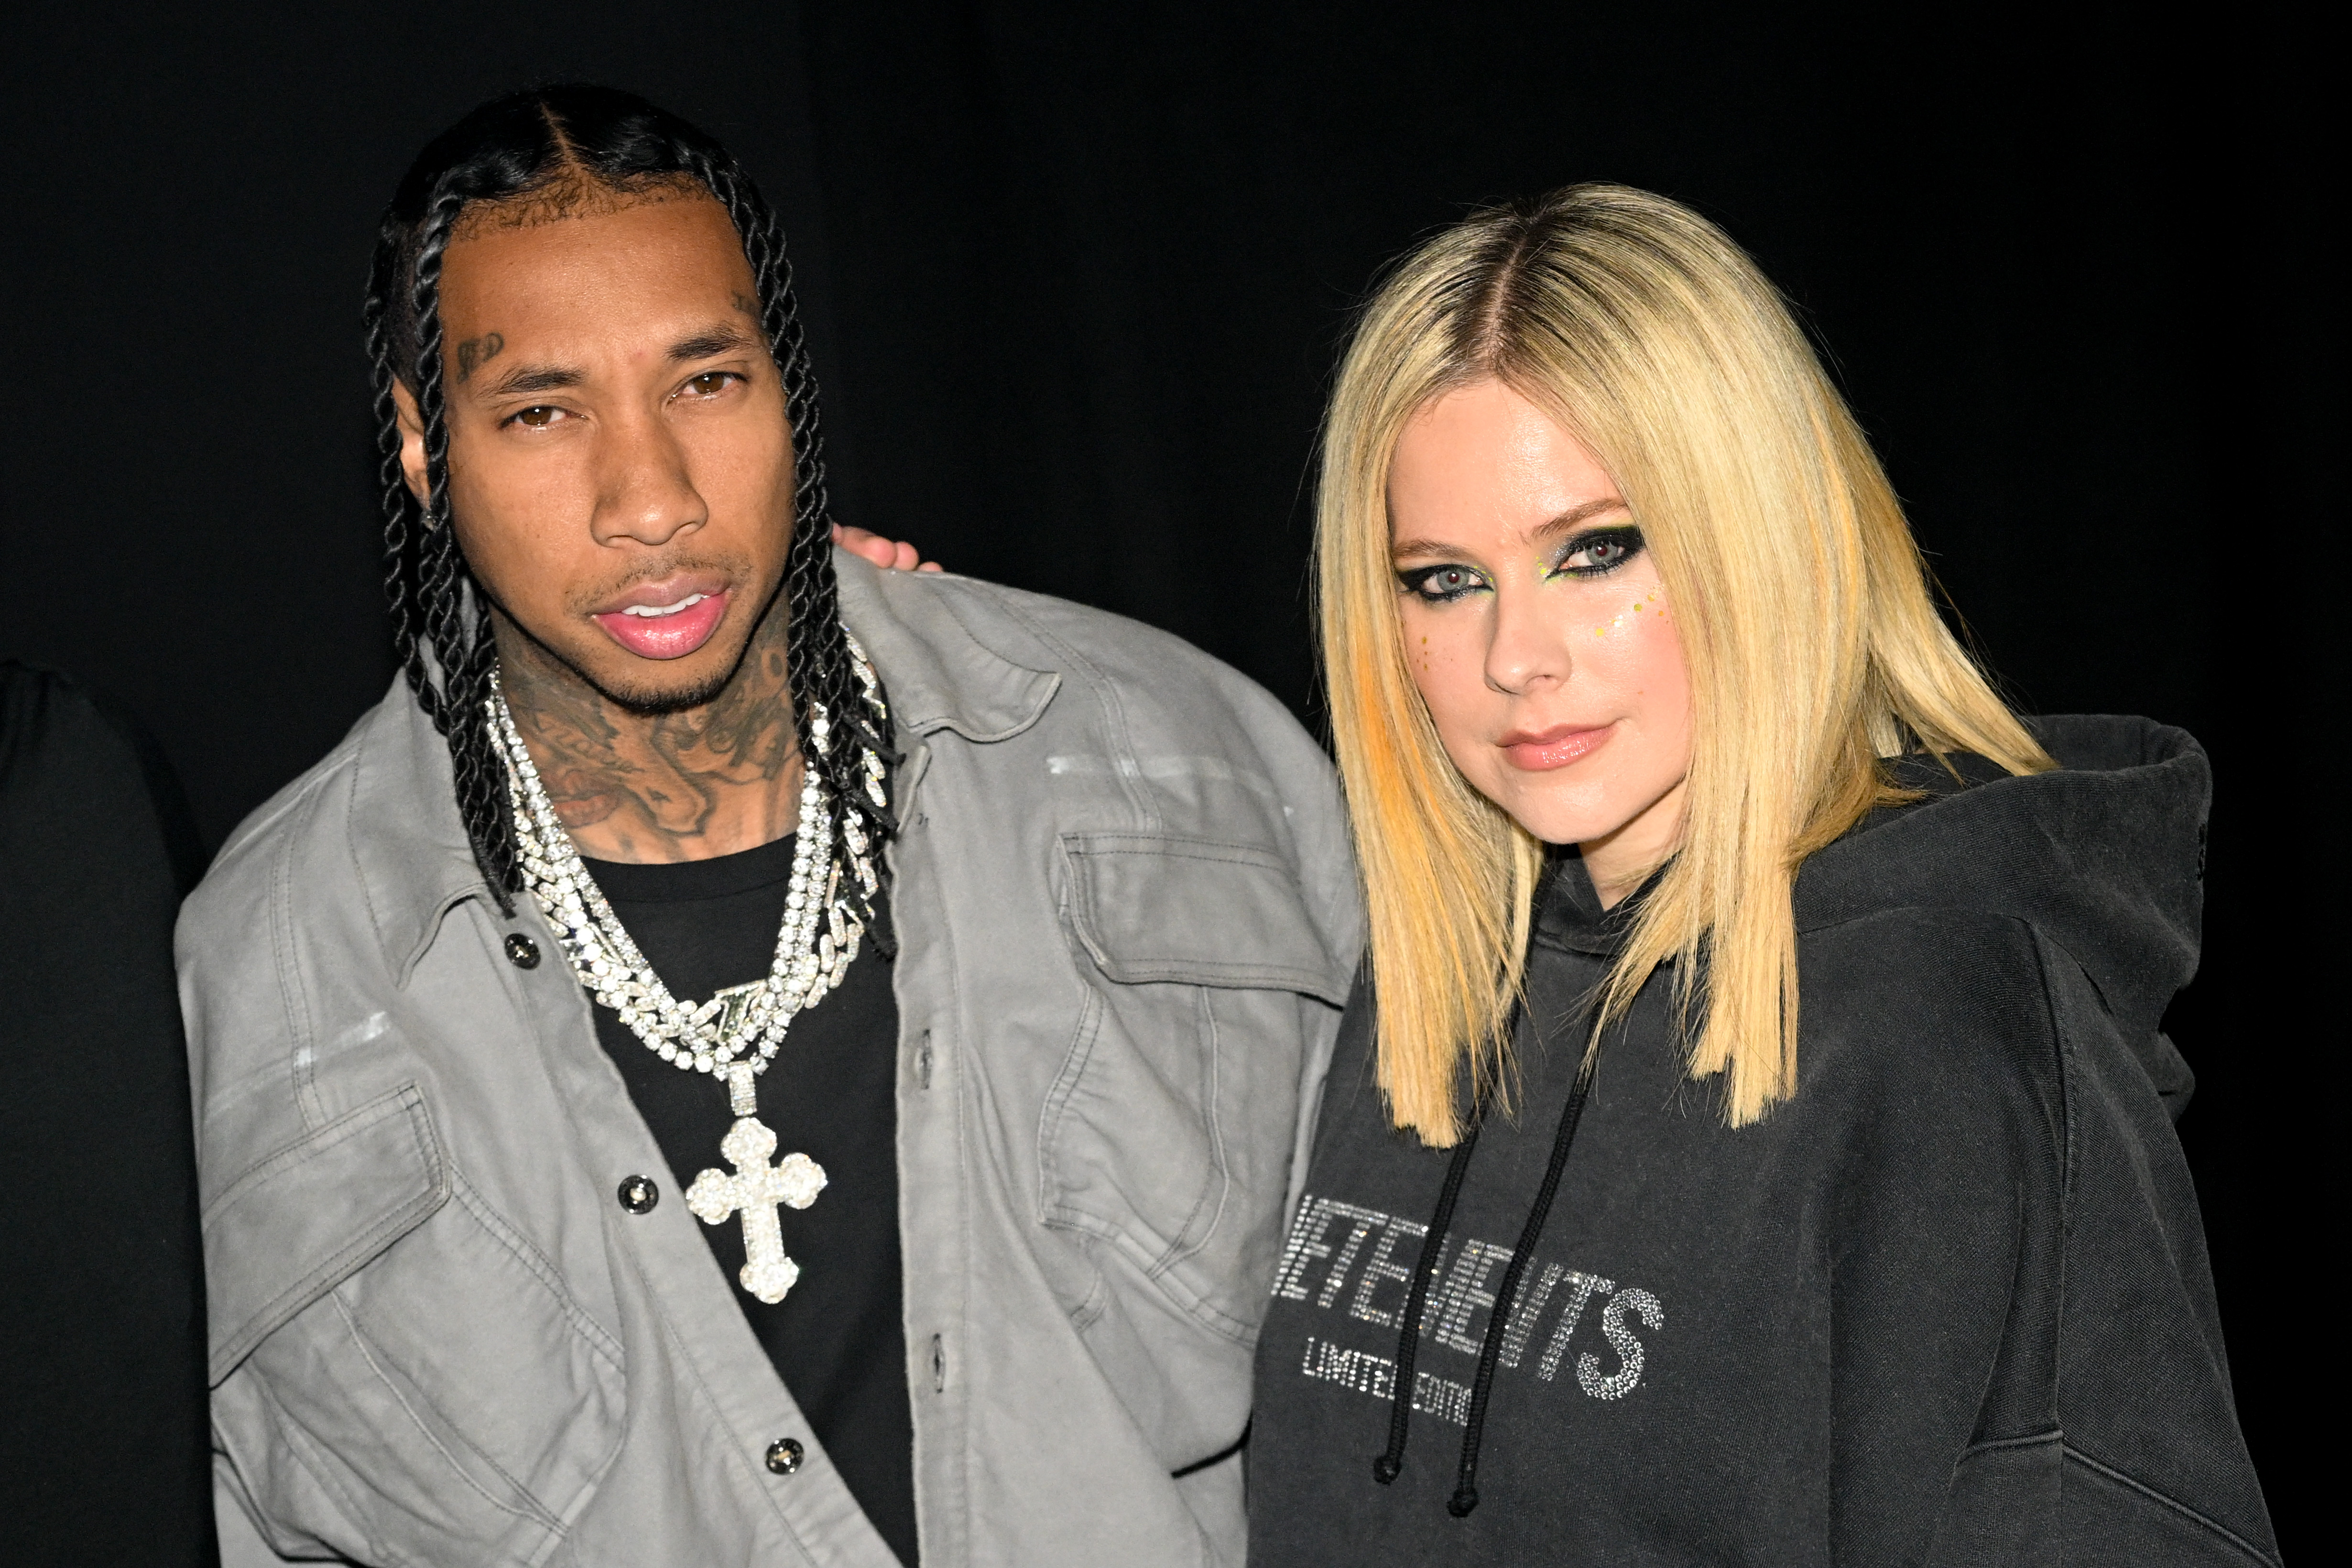 She recently called it quits with her boyfriend Tyga